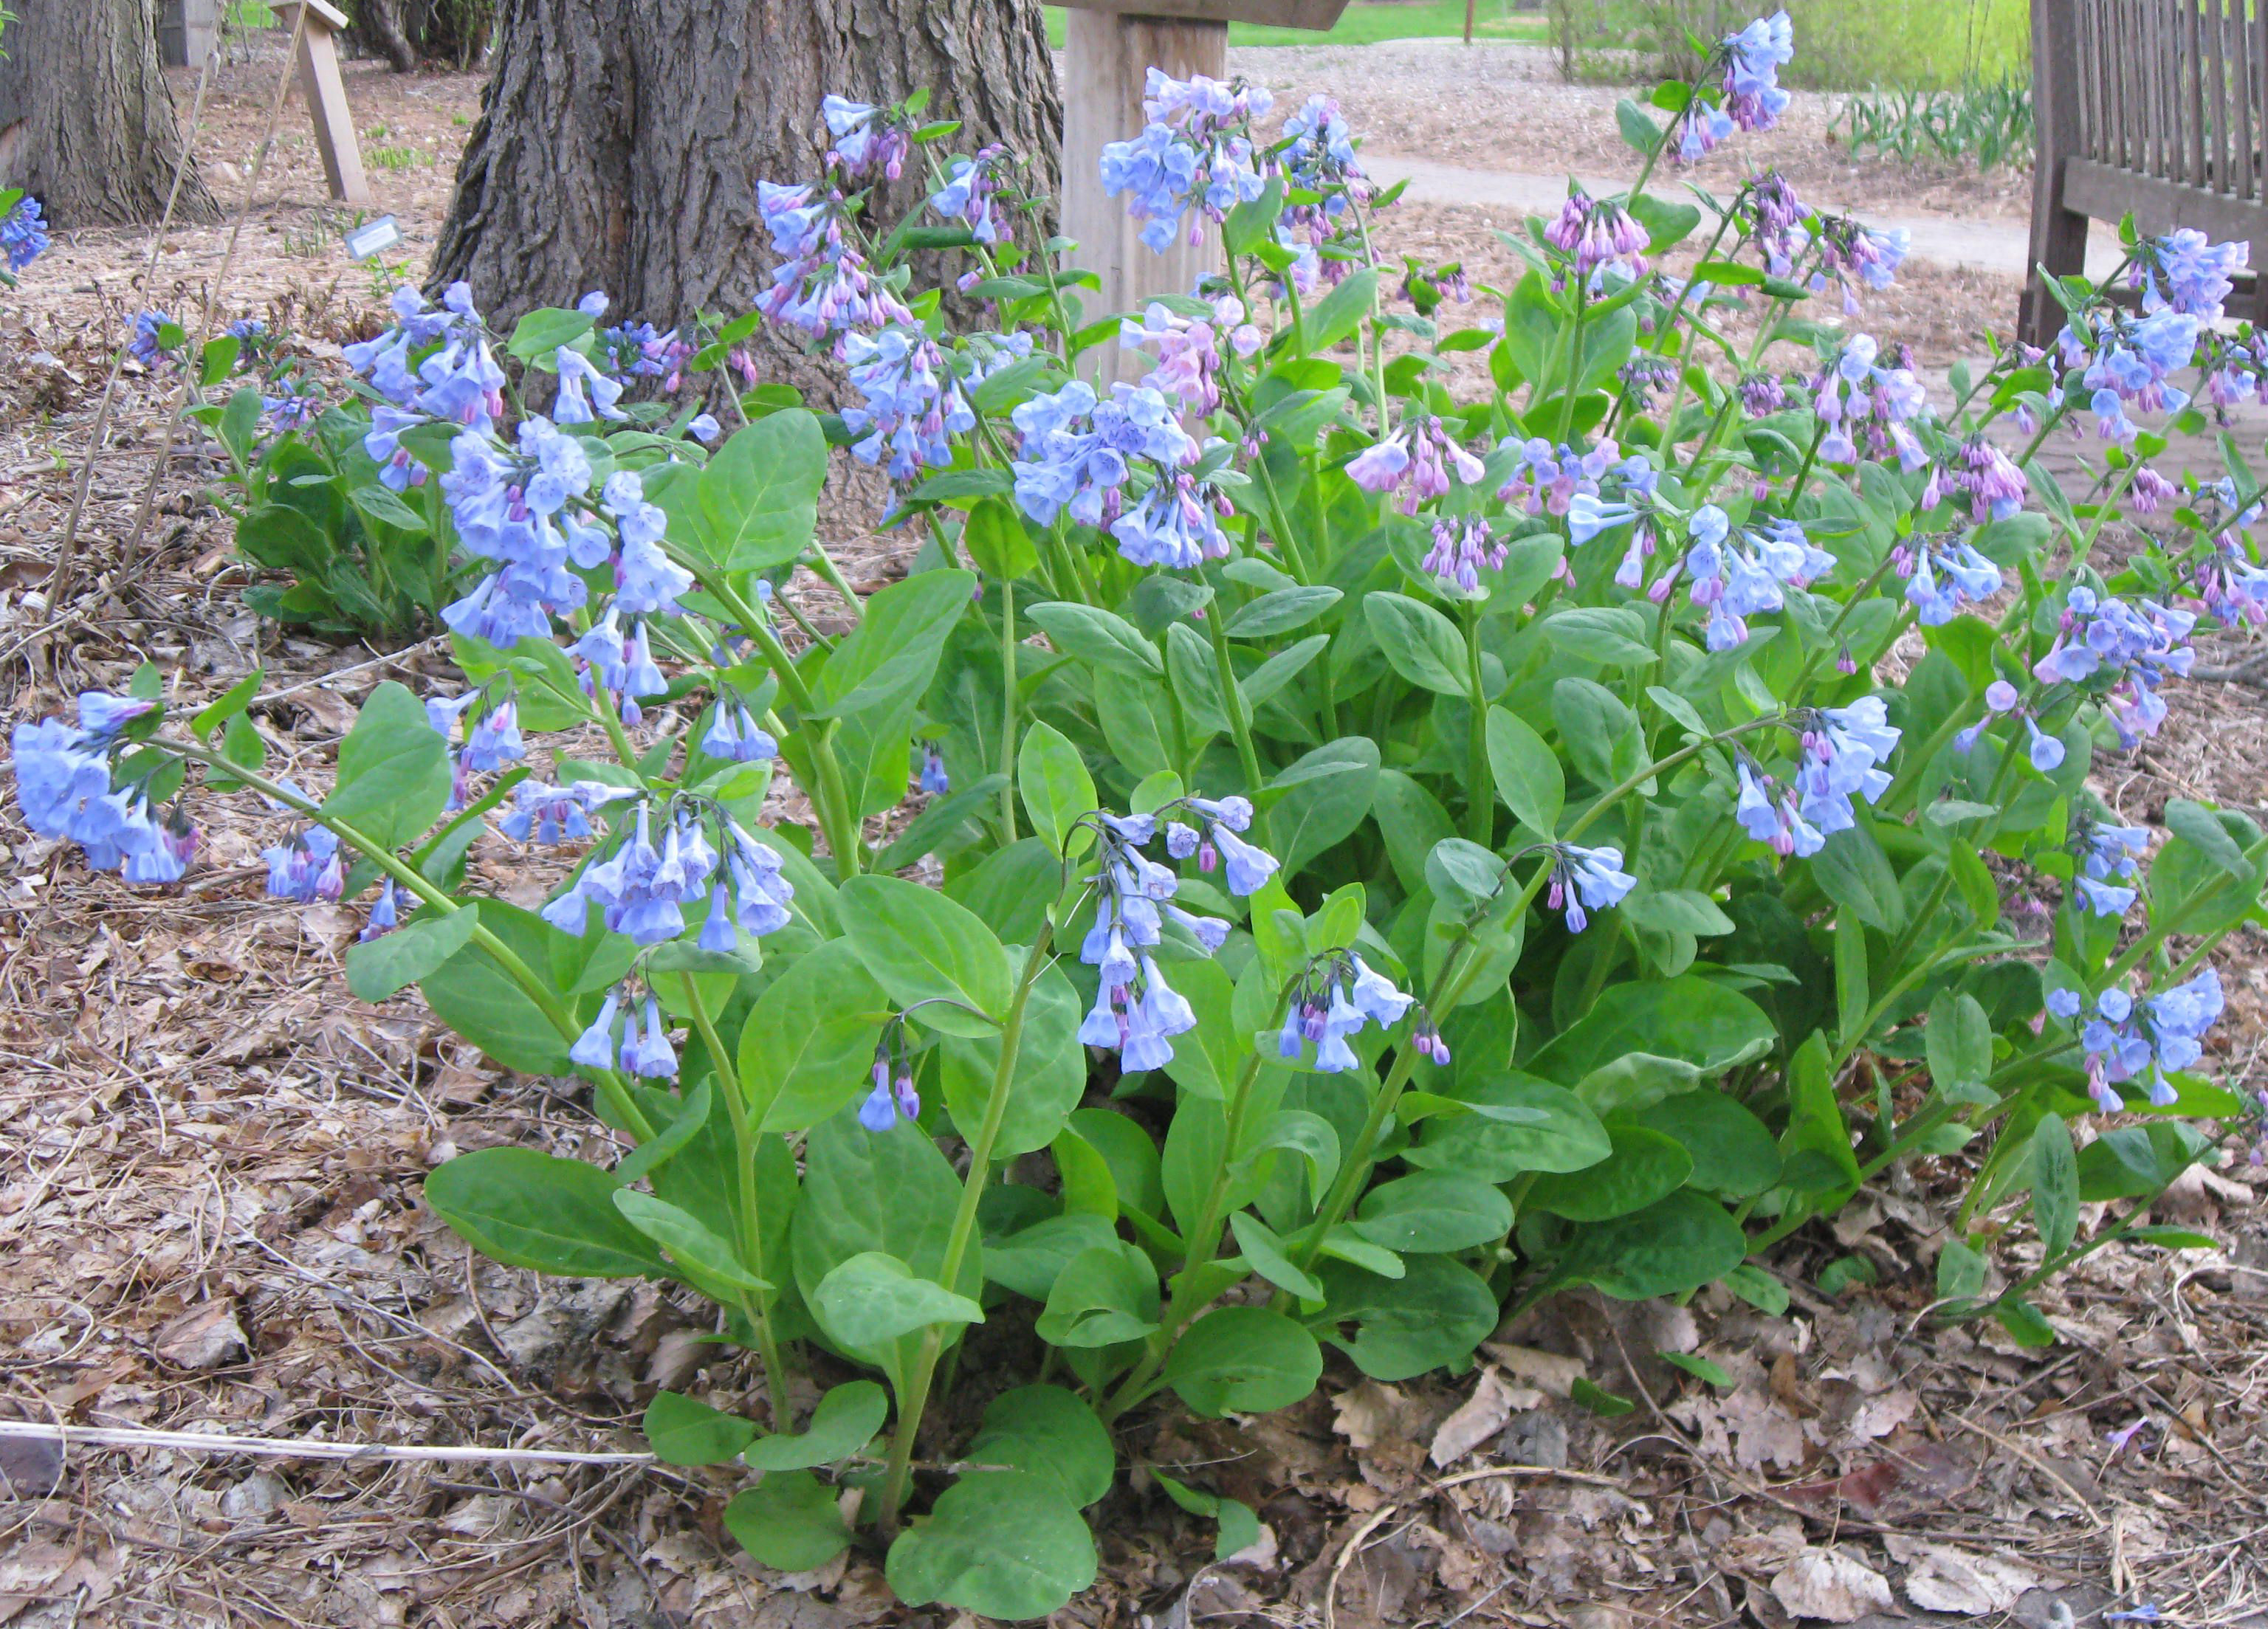 green, bushy plant with light violet-colored flowers